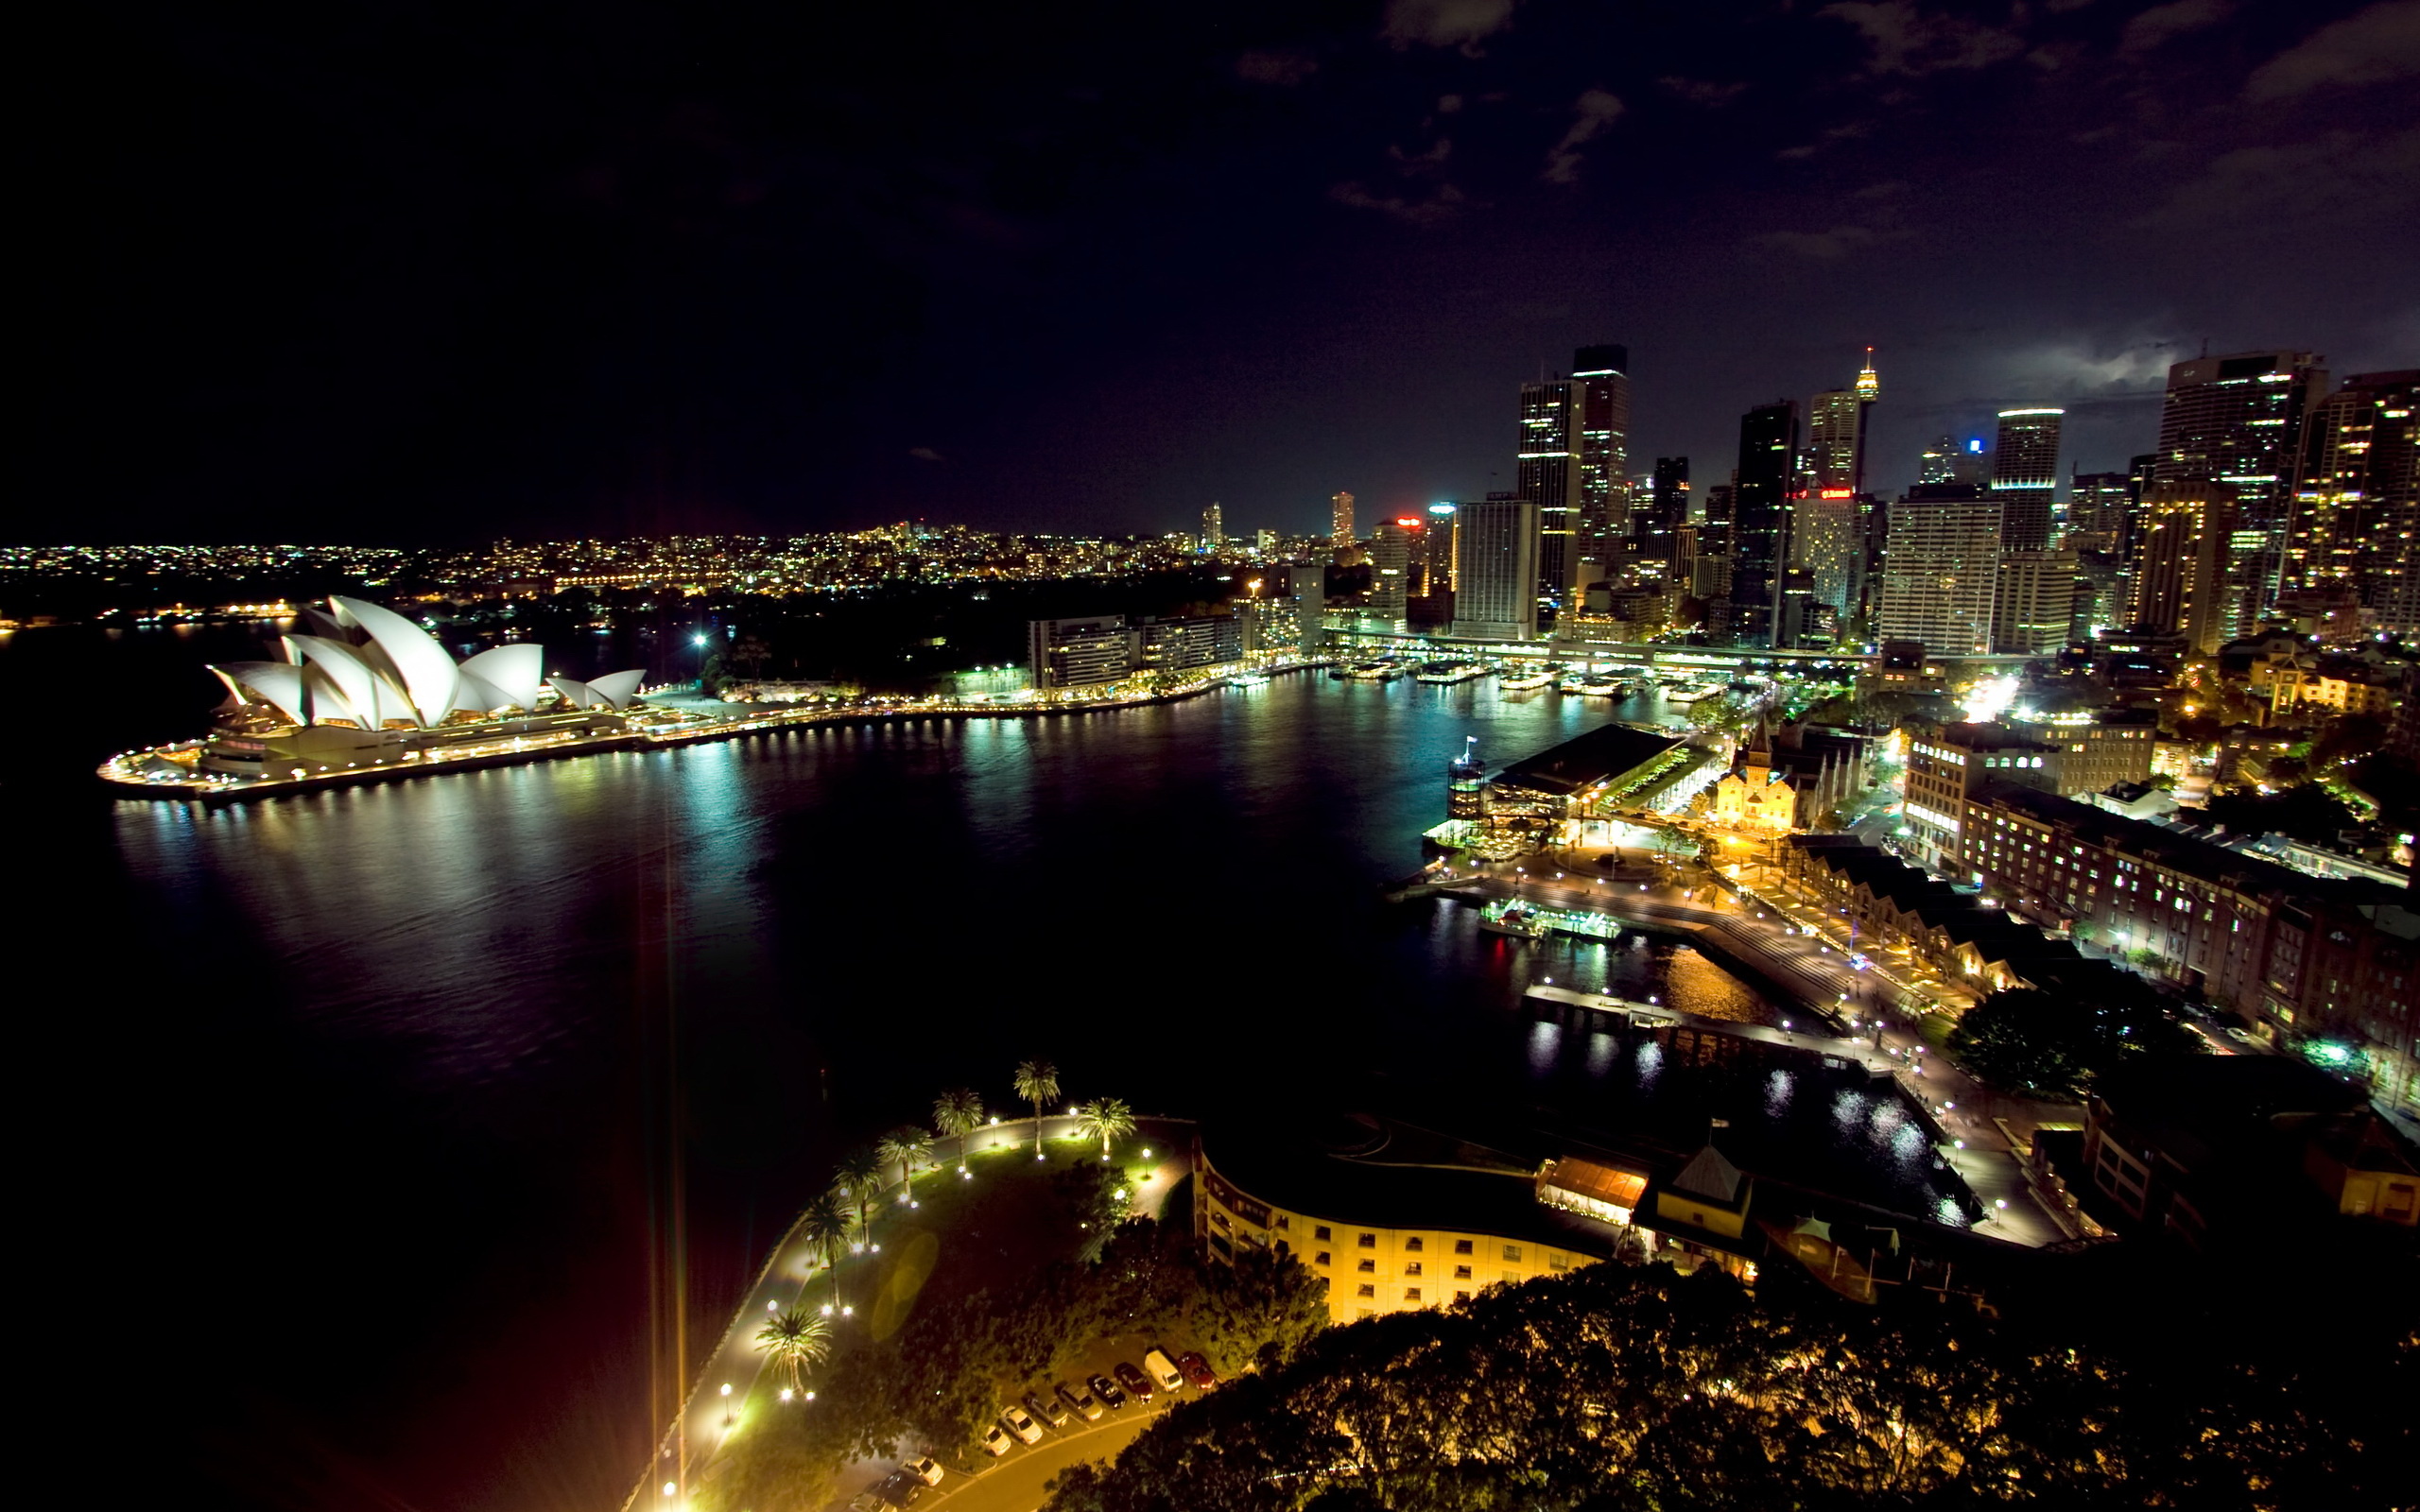 Sydney: The city is surrounding the world’s largest natural harbor. 2560x1600 HD Wallpaper.